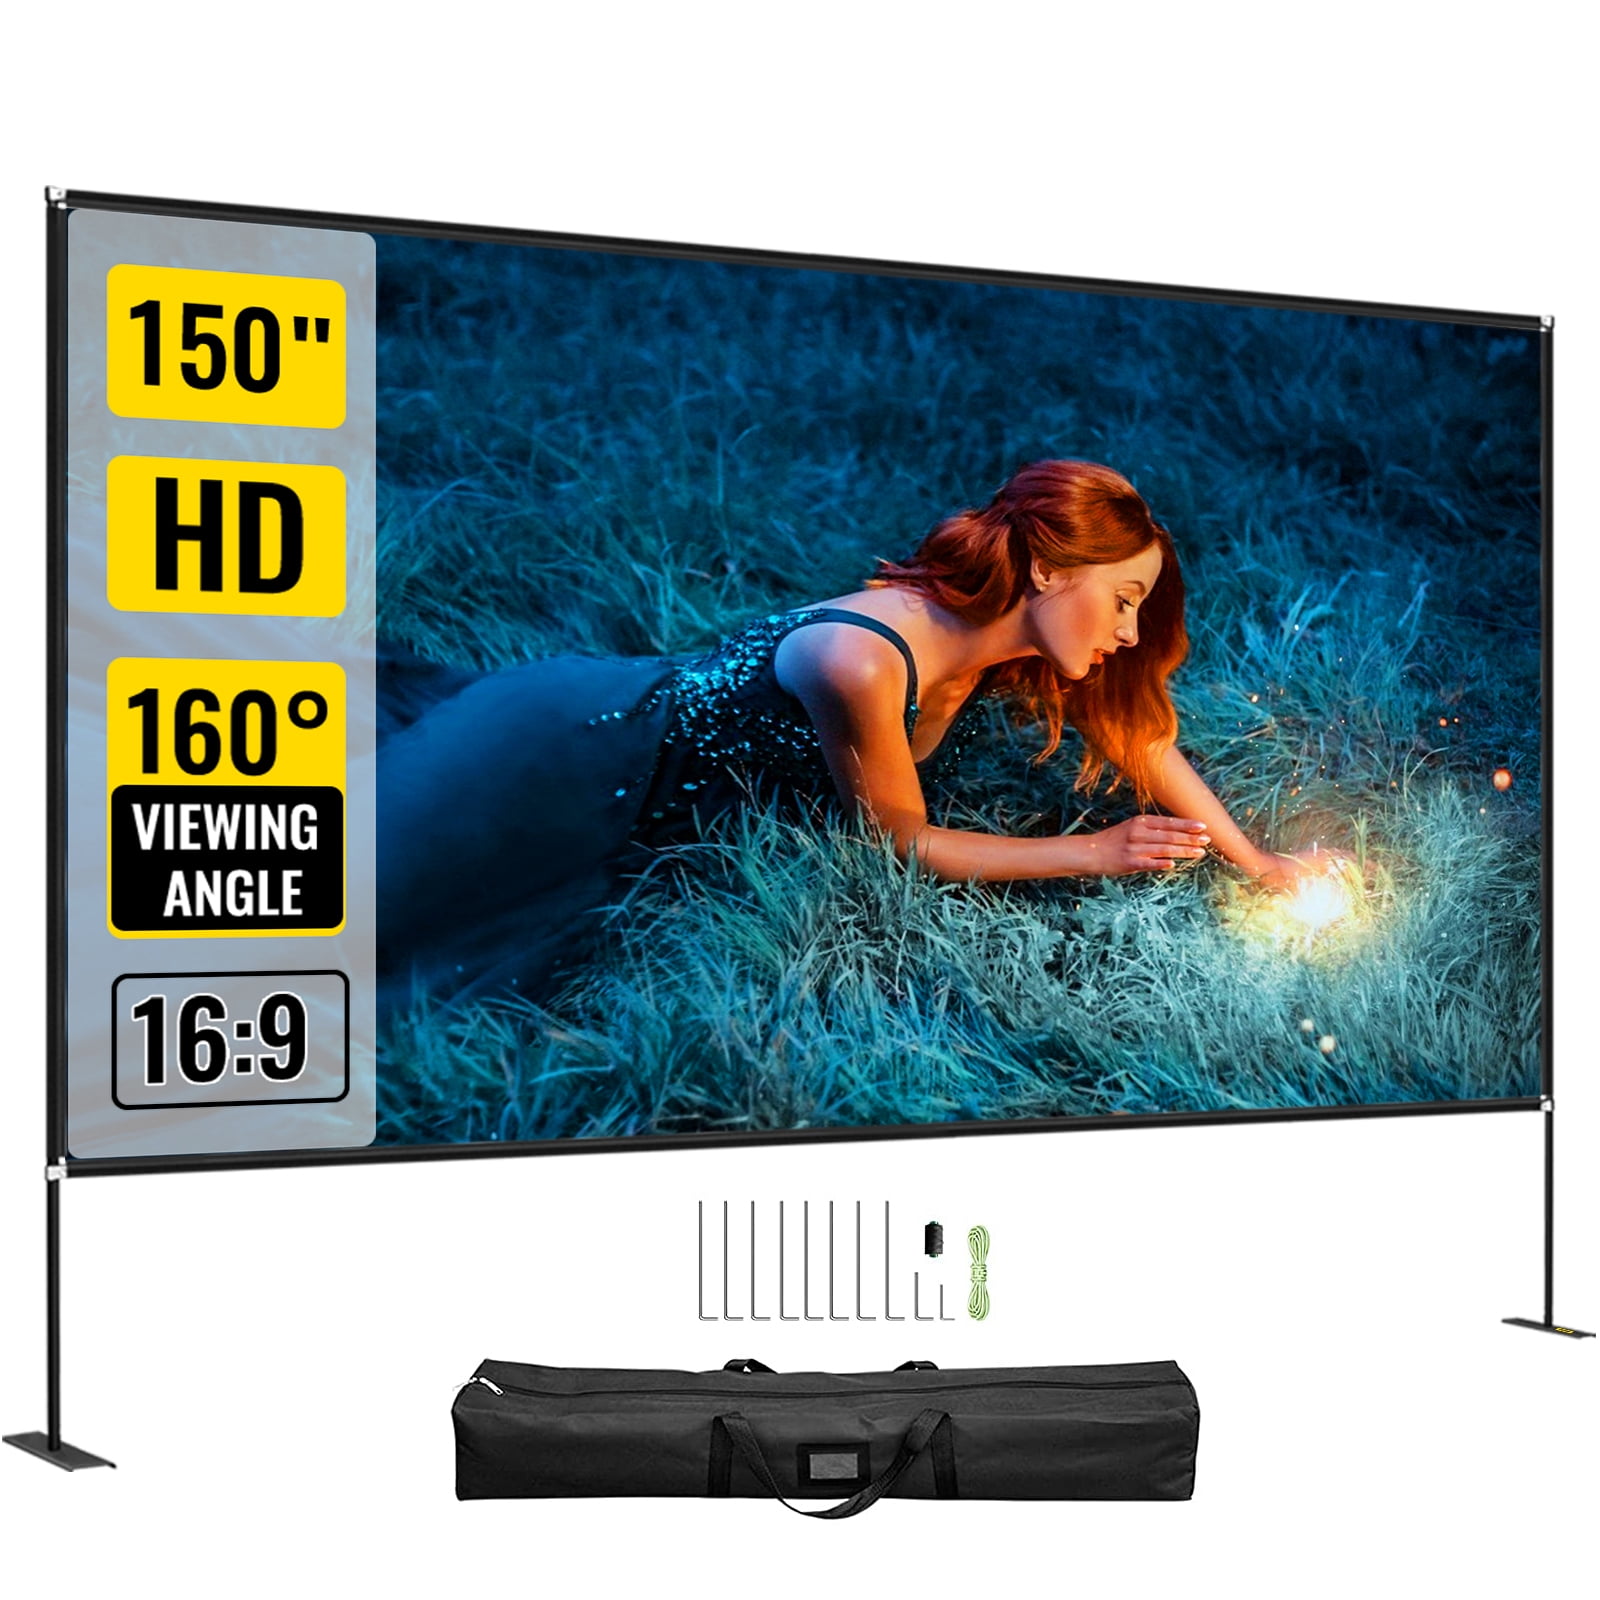 Portable 16:9 4K HD Rear Front Movie Screen Pull Down with Carry Bag Wrinkle-Free Design for Home Theater Backyard Cinema Projector Screen and Stand,Towond 100 inch Indoor Outdoor Projection Screen 